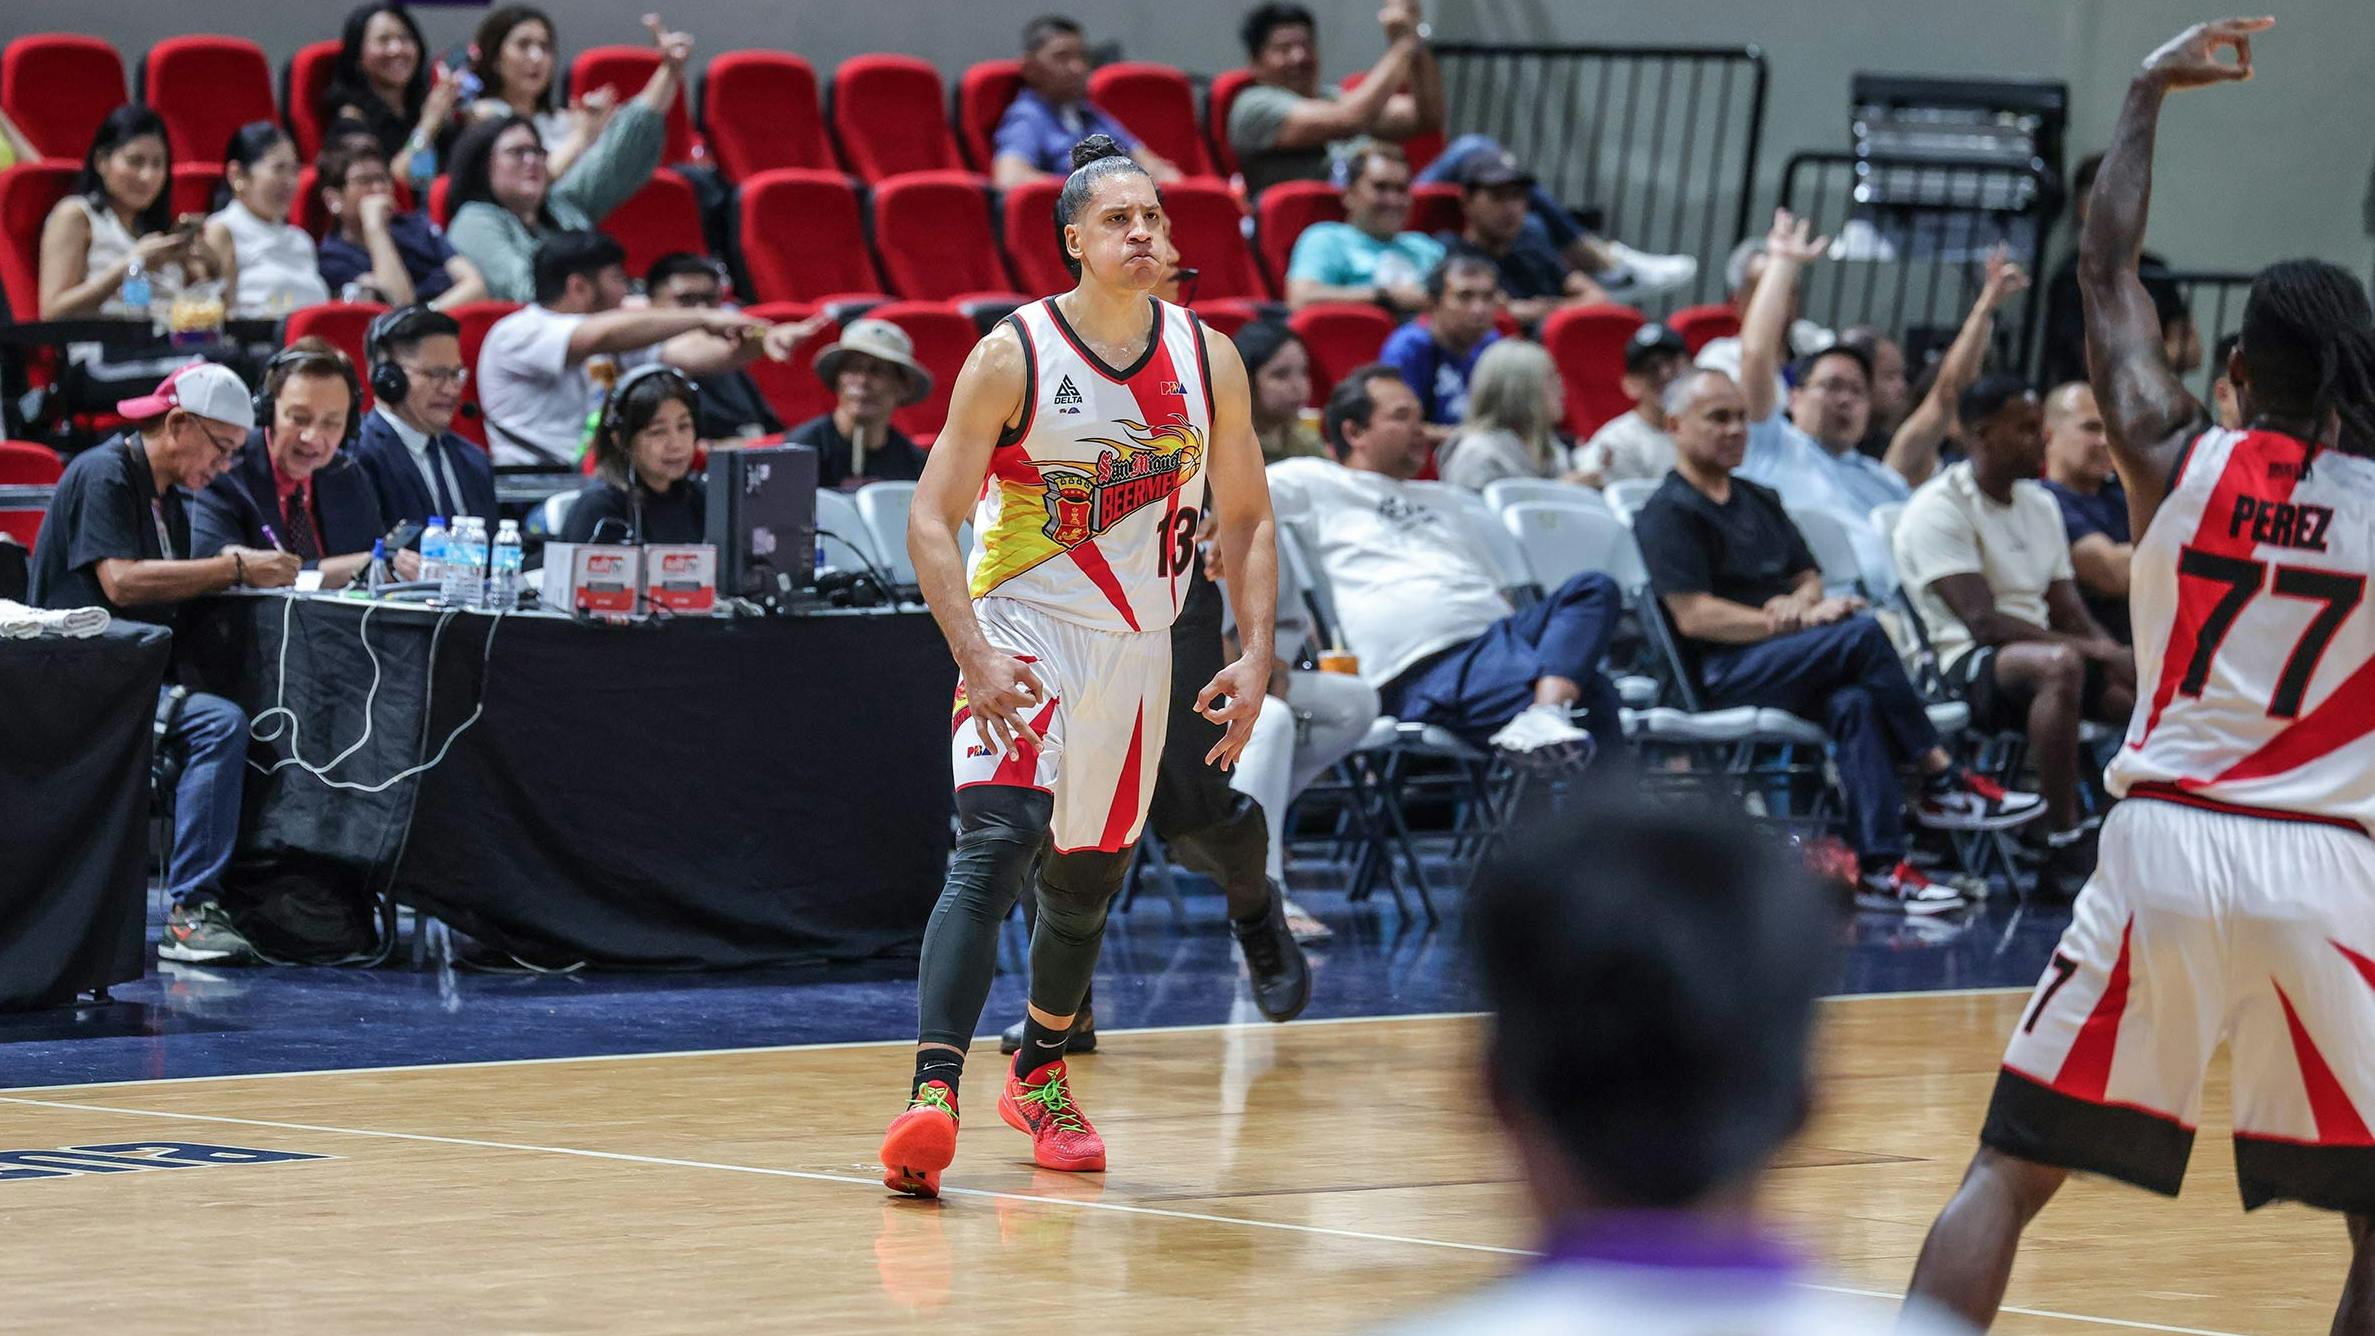 PBA: Marcio Lassiter heats up in 3rd period as San Miguel derails Converge to secure QF seat